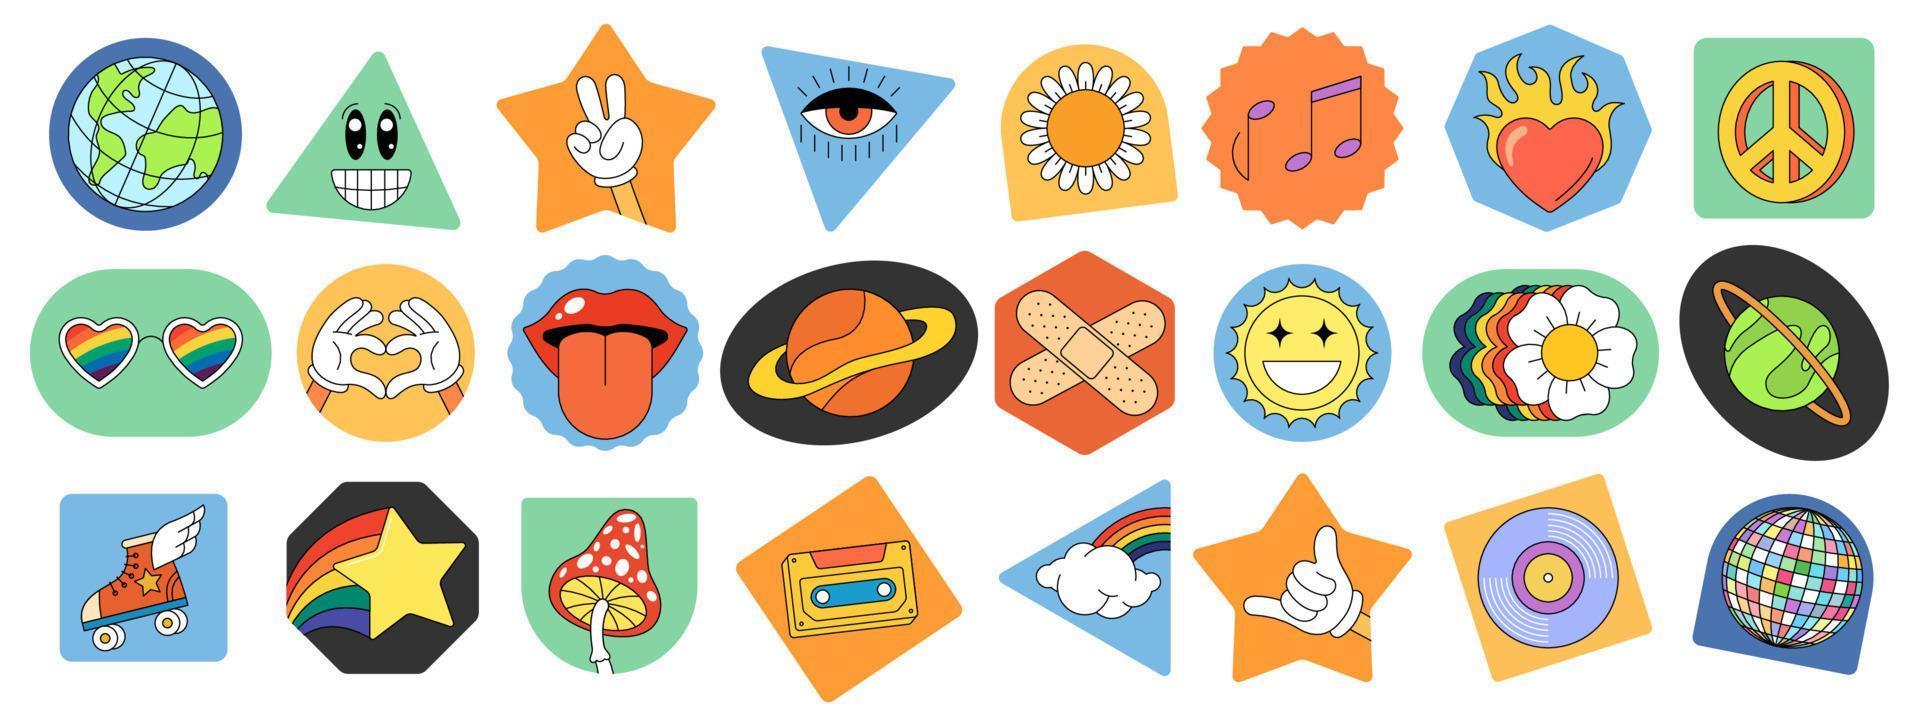 Retro groovy element set. Funny psychedelic hippie cartoon badge collection. Vintage hippy crazy various elements sticker pack. Abstract 60s, 70s trendy y2k pop culture style design. Isolated vector